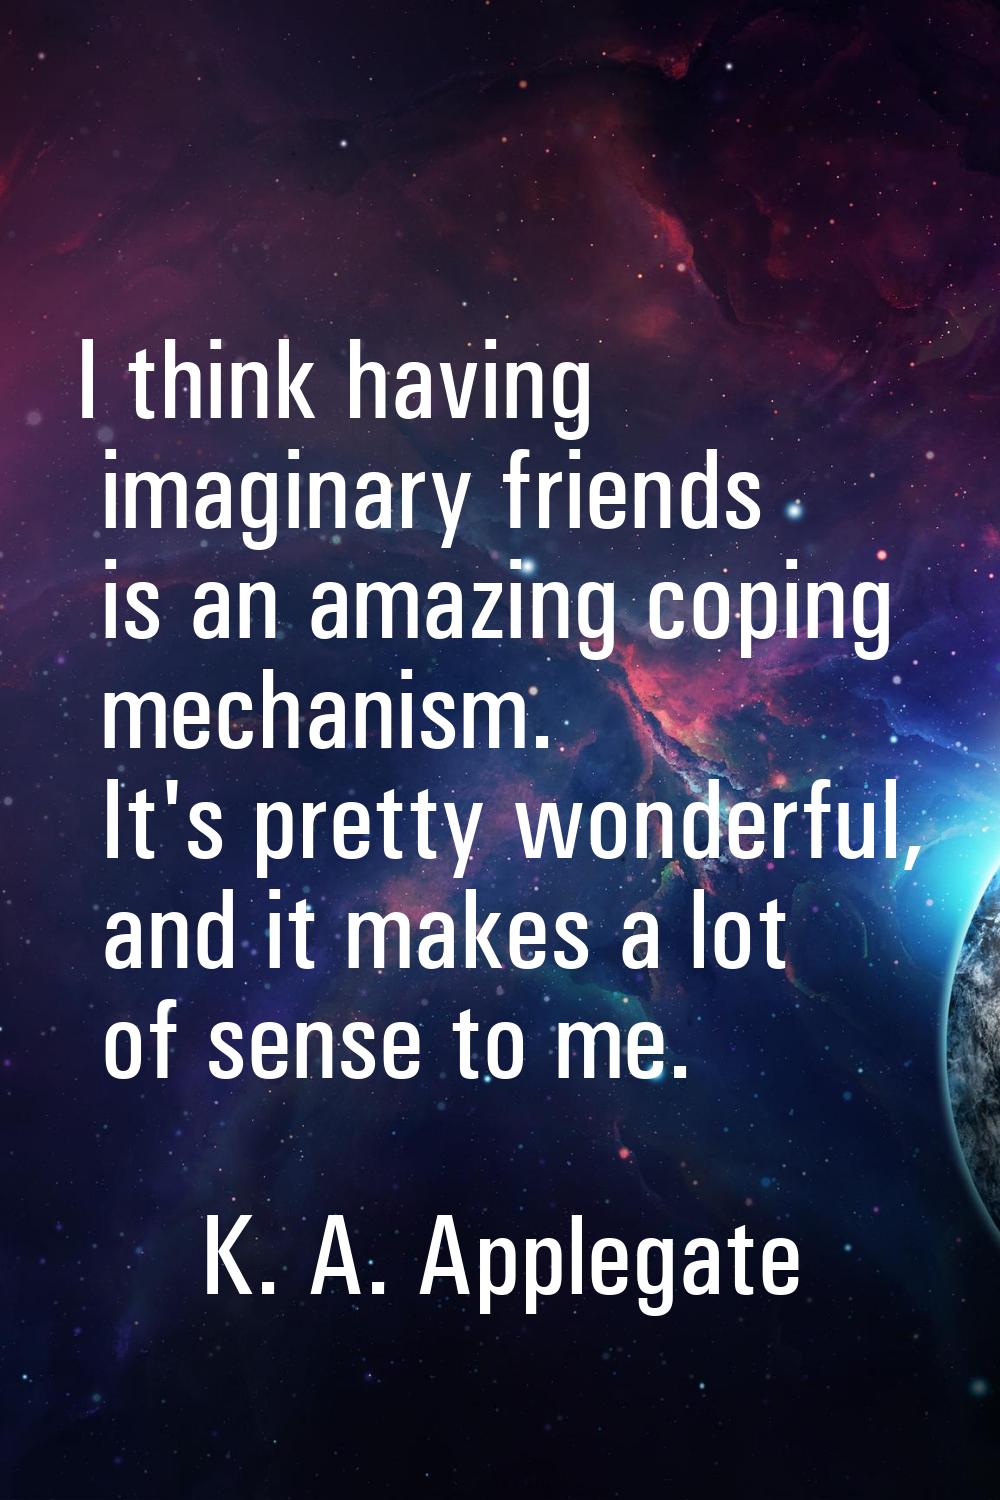 I think having imaginary friends is an amazing coping mechanism. It's pretty wonderful, and it make